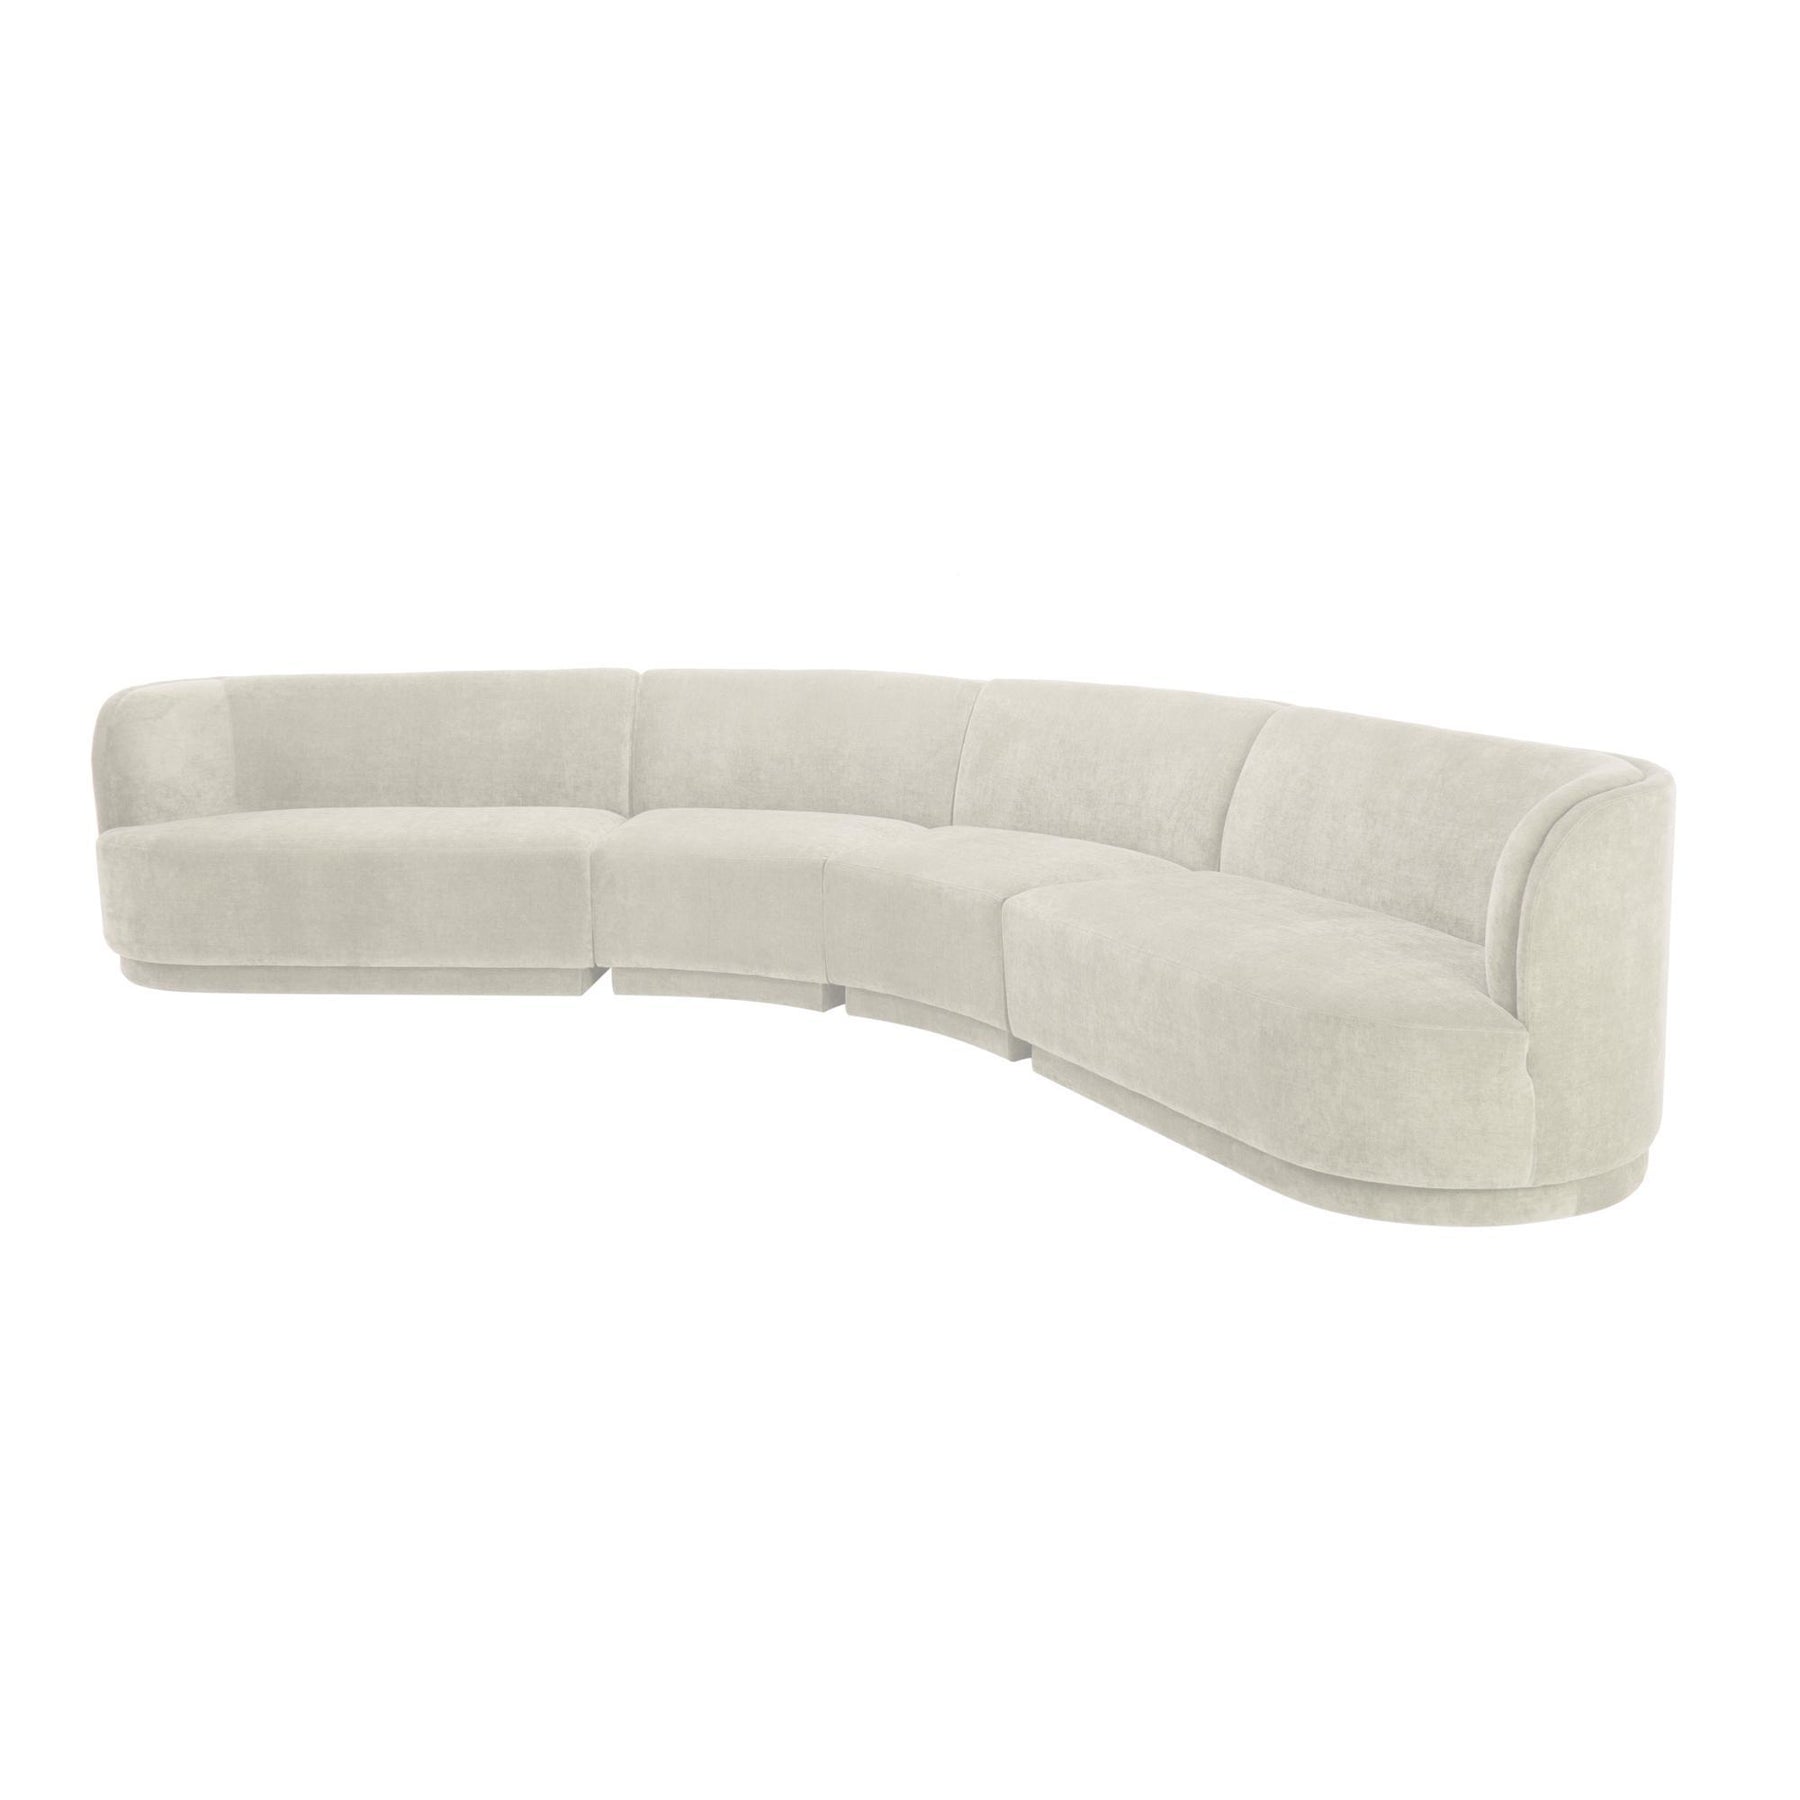 Moe's Home Collection Yoon Eclipse Modular Sectional Chaise Left Sweet Cream - JM-1024-05